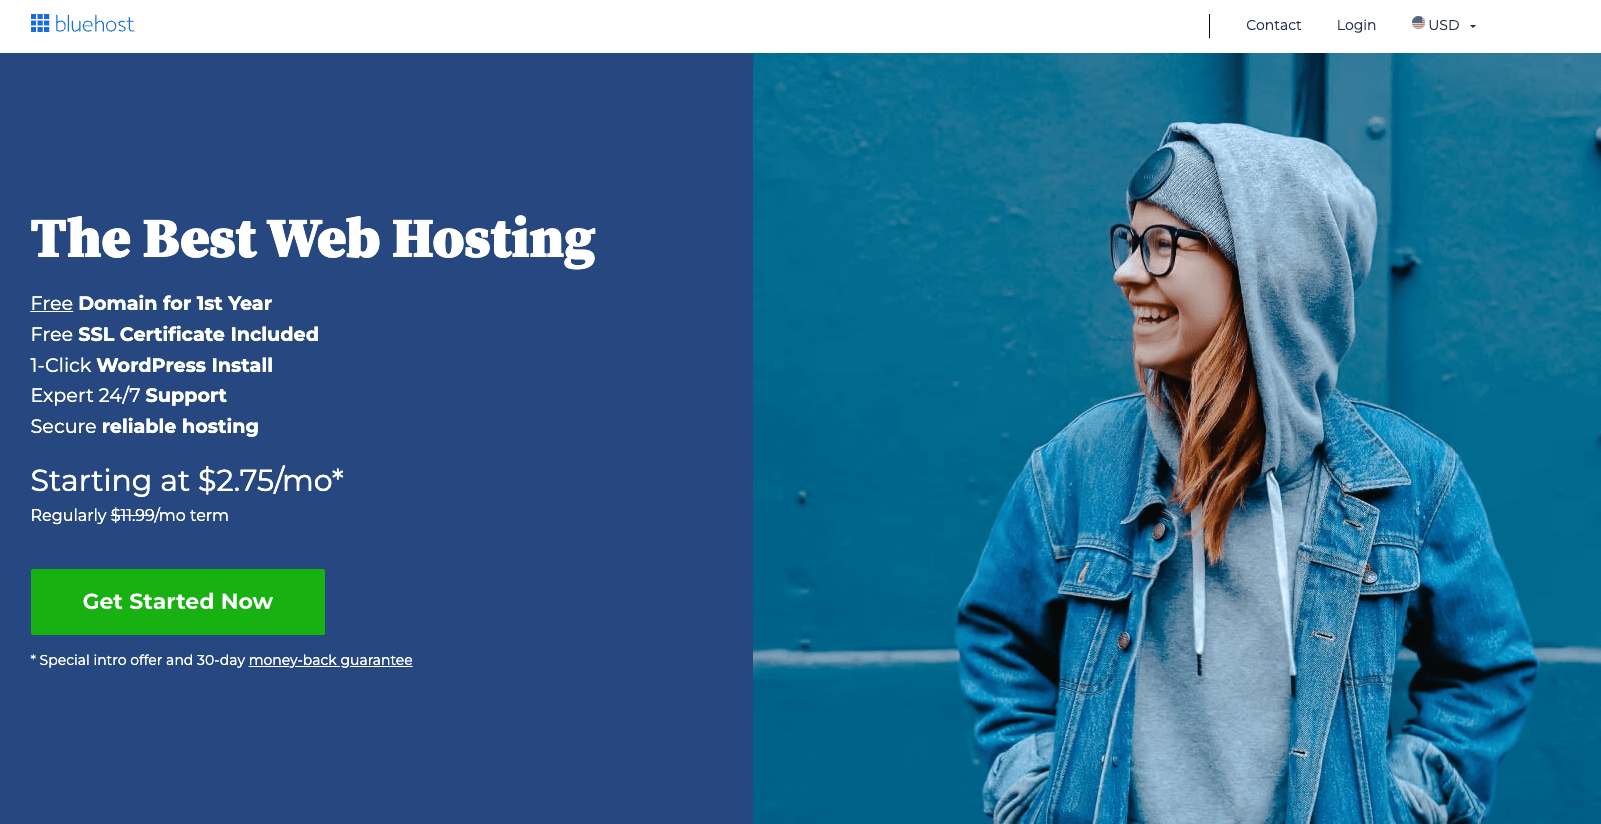 Bluehost - great hosting company to start a personal blog